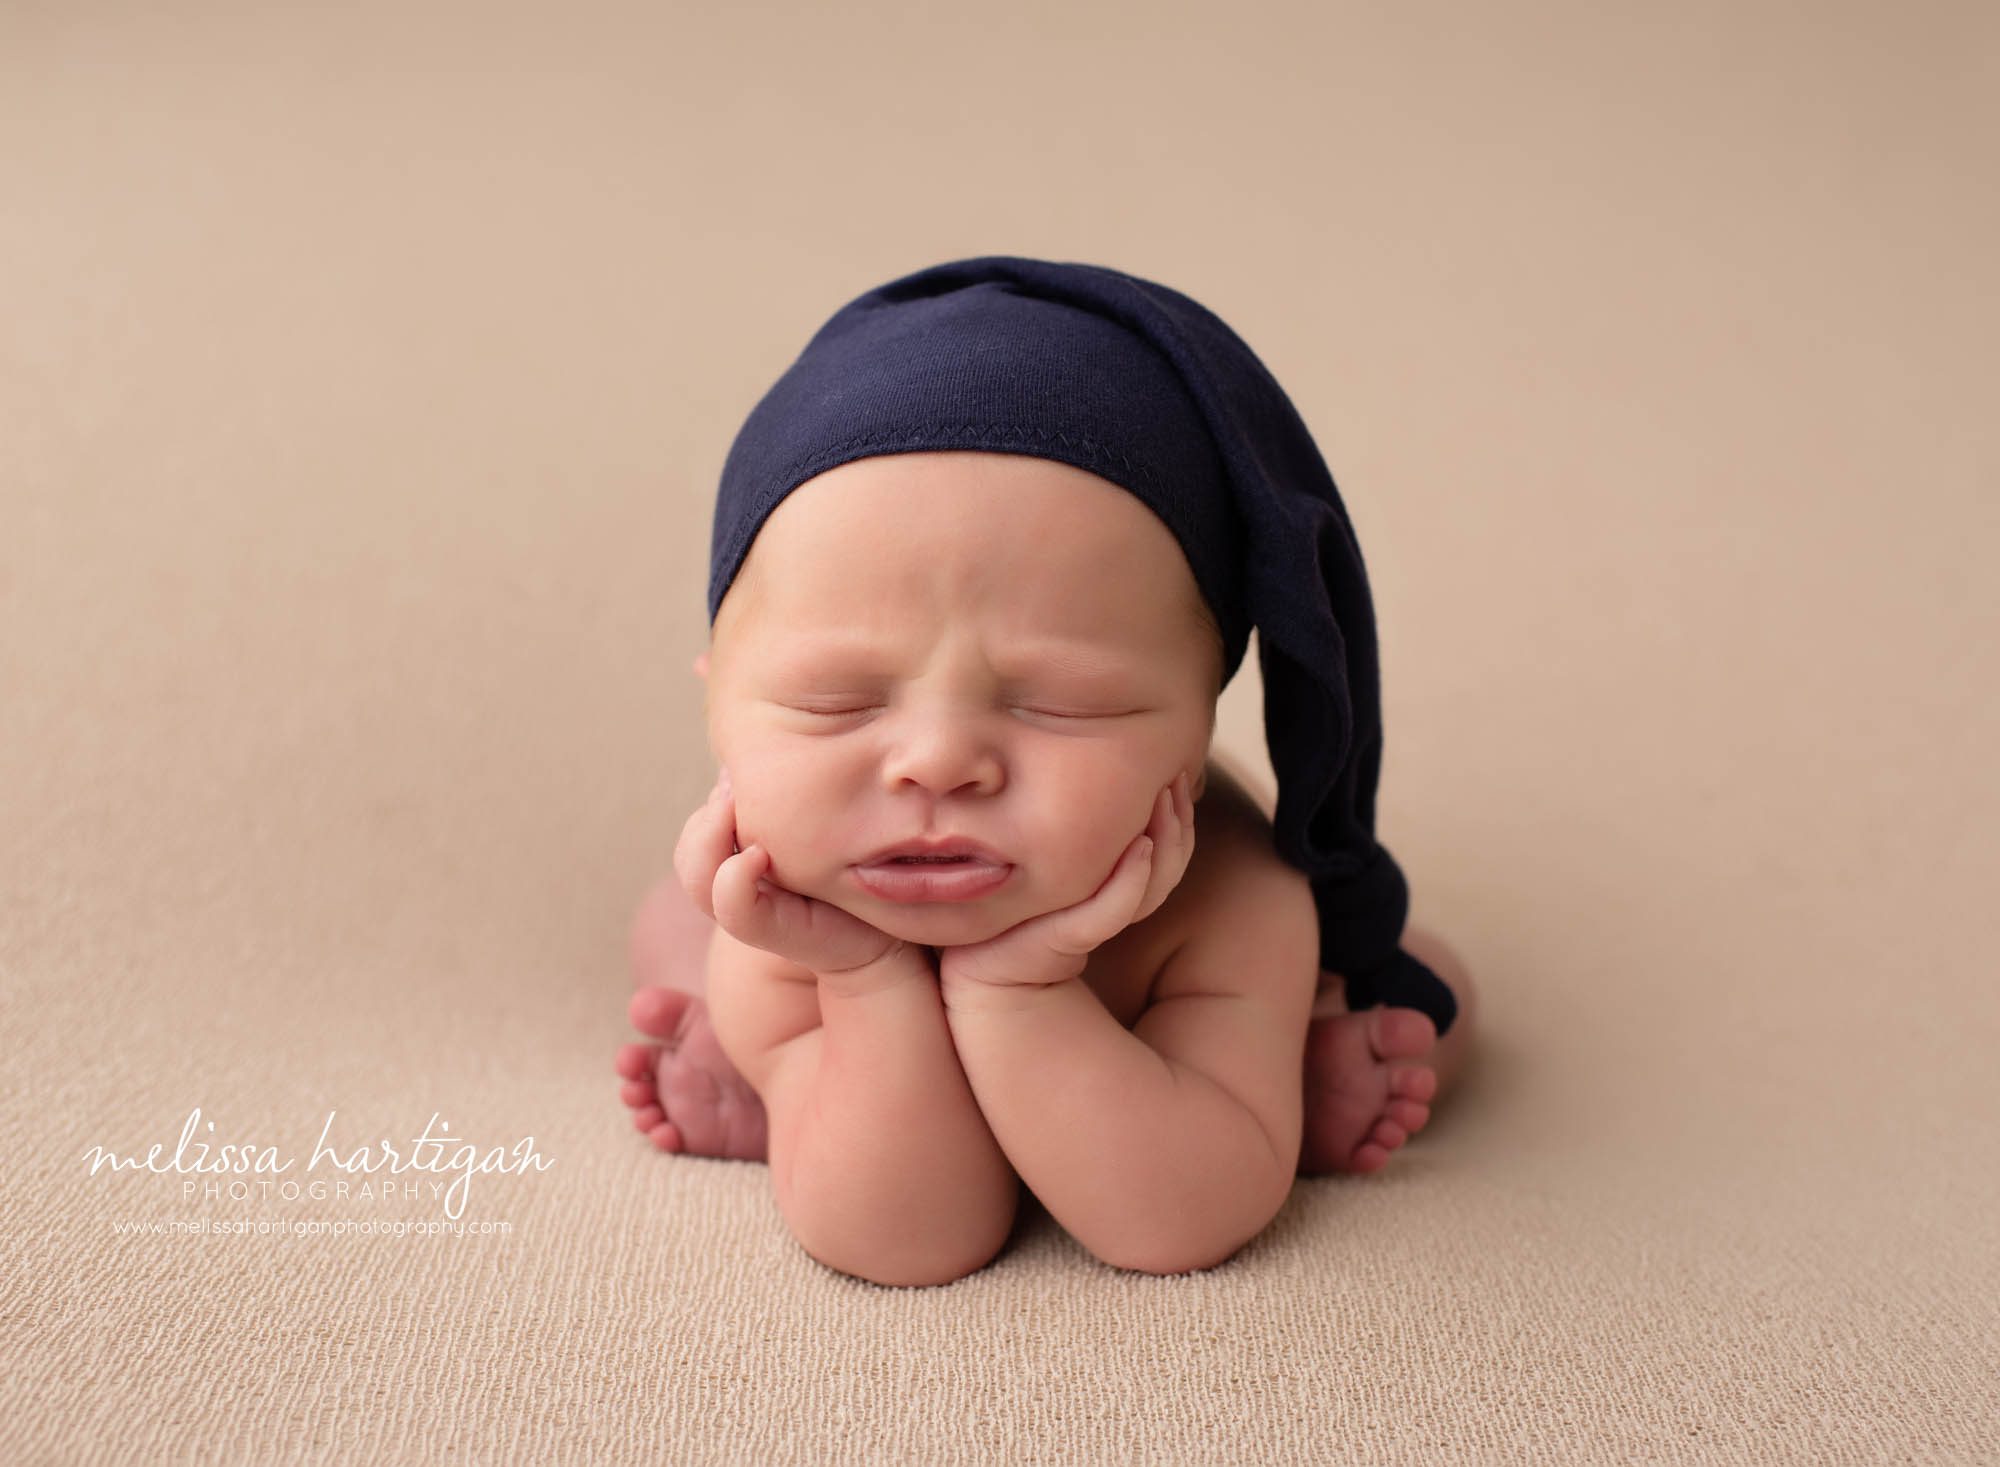 baby boy posed groffy pose with navy blue sleepy cap on